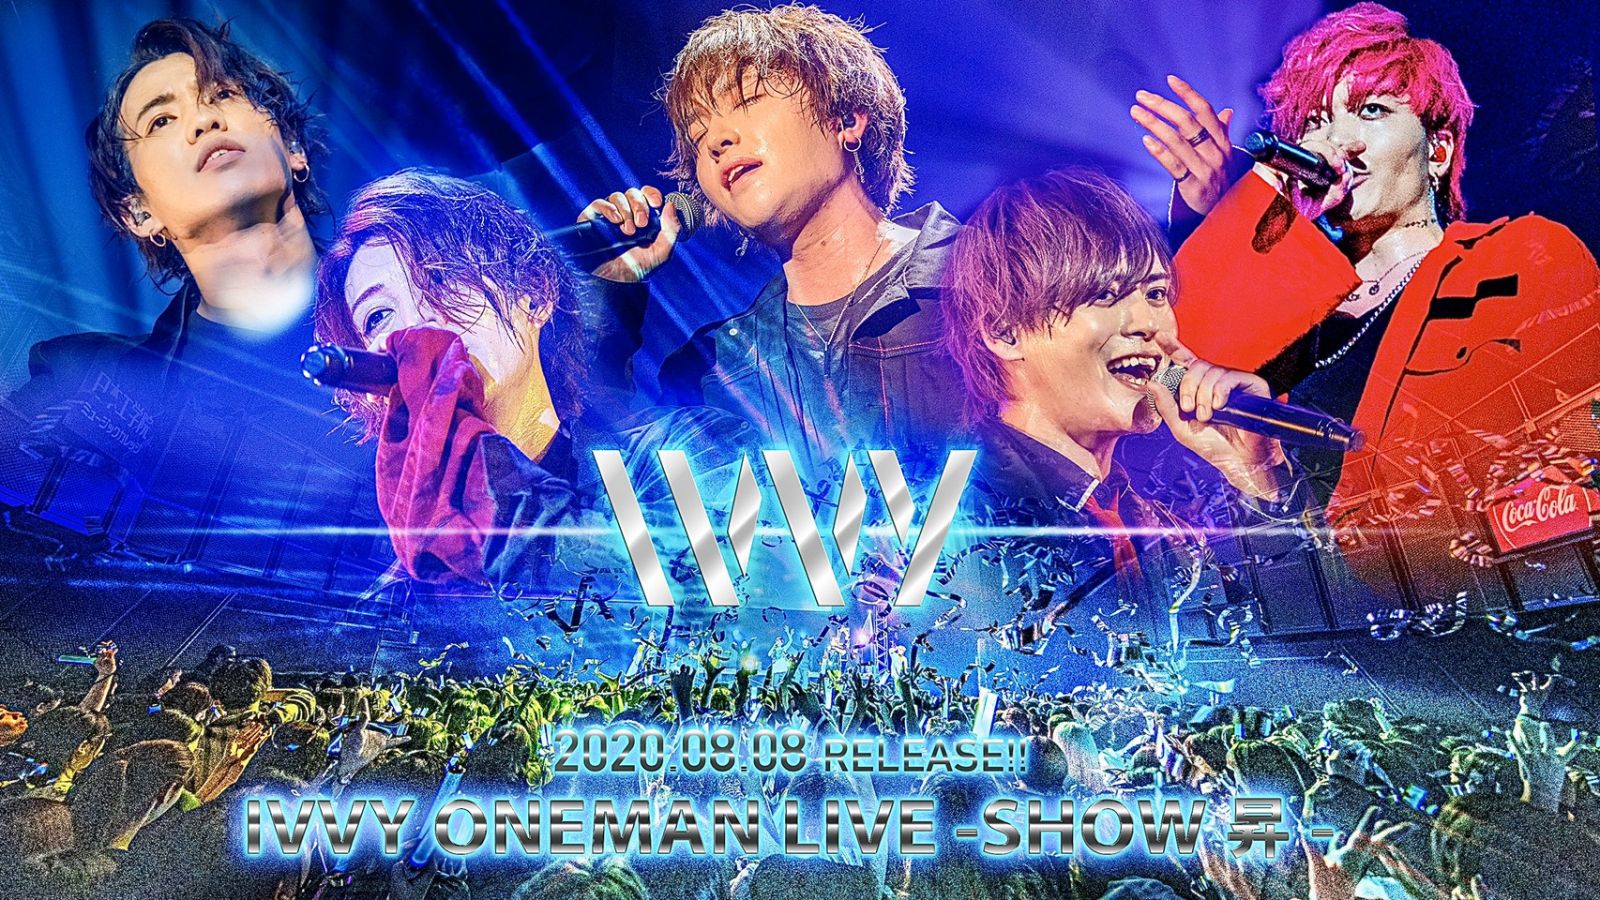 IVVY ONE MAN LIVE ～ SHOW 昇 ～ | 129分 | (Blu-ray) | VICTOR